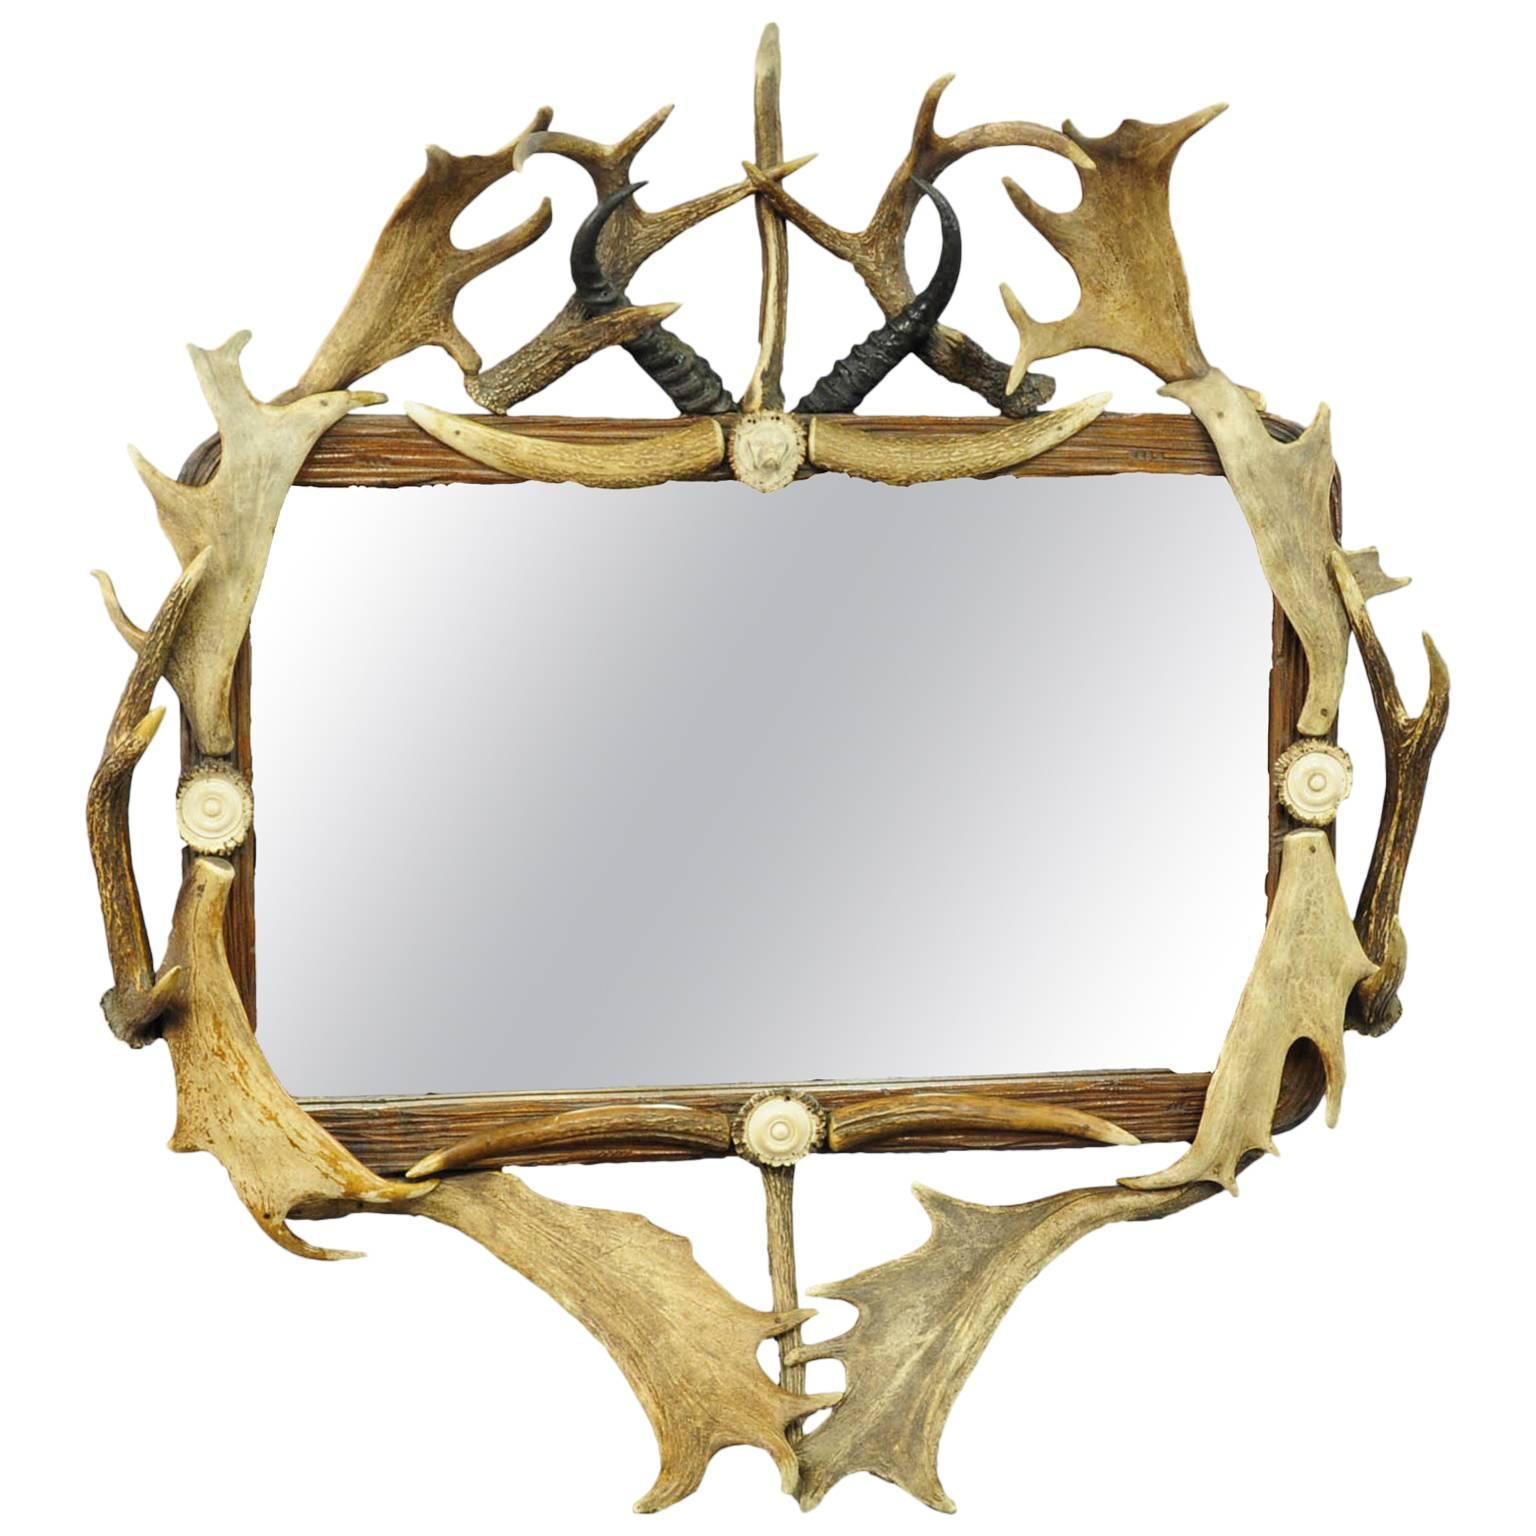 Antique Antler Frame with Rustic Antler Decorations and Mirror